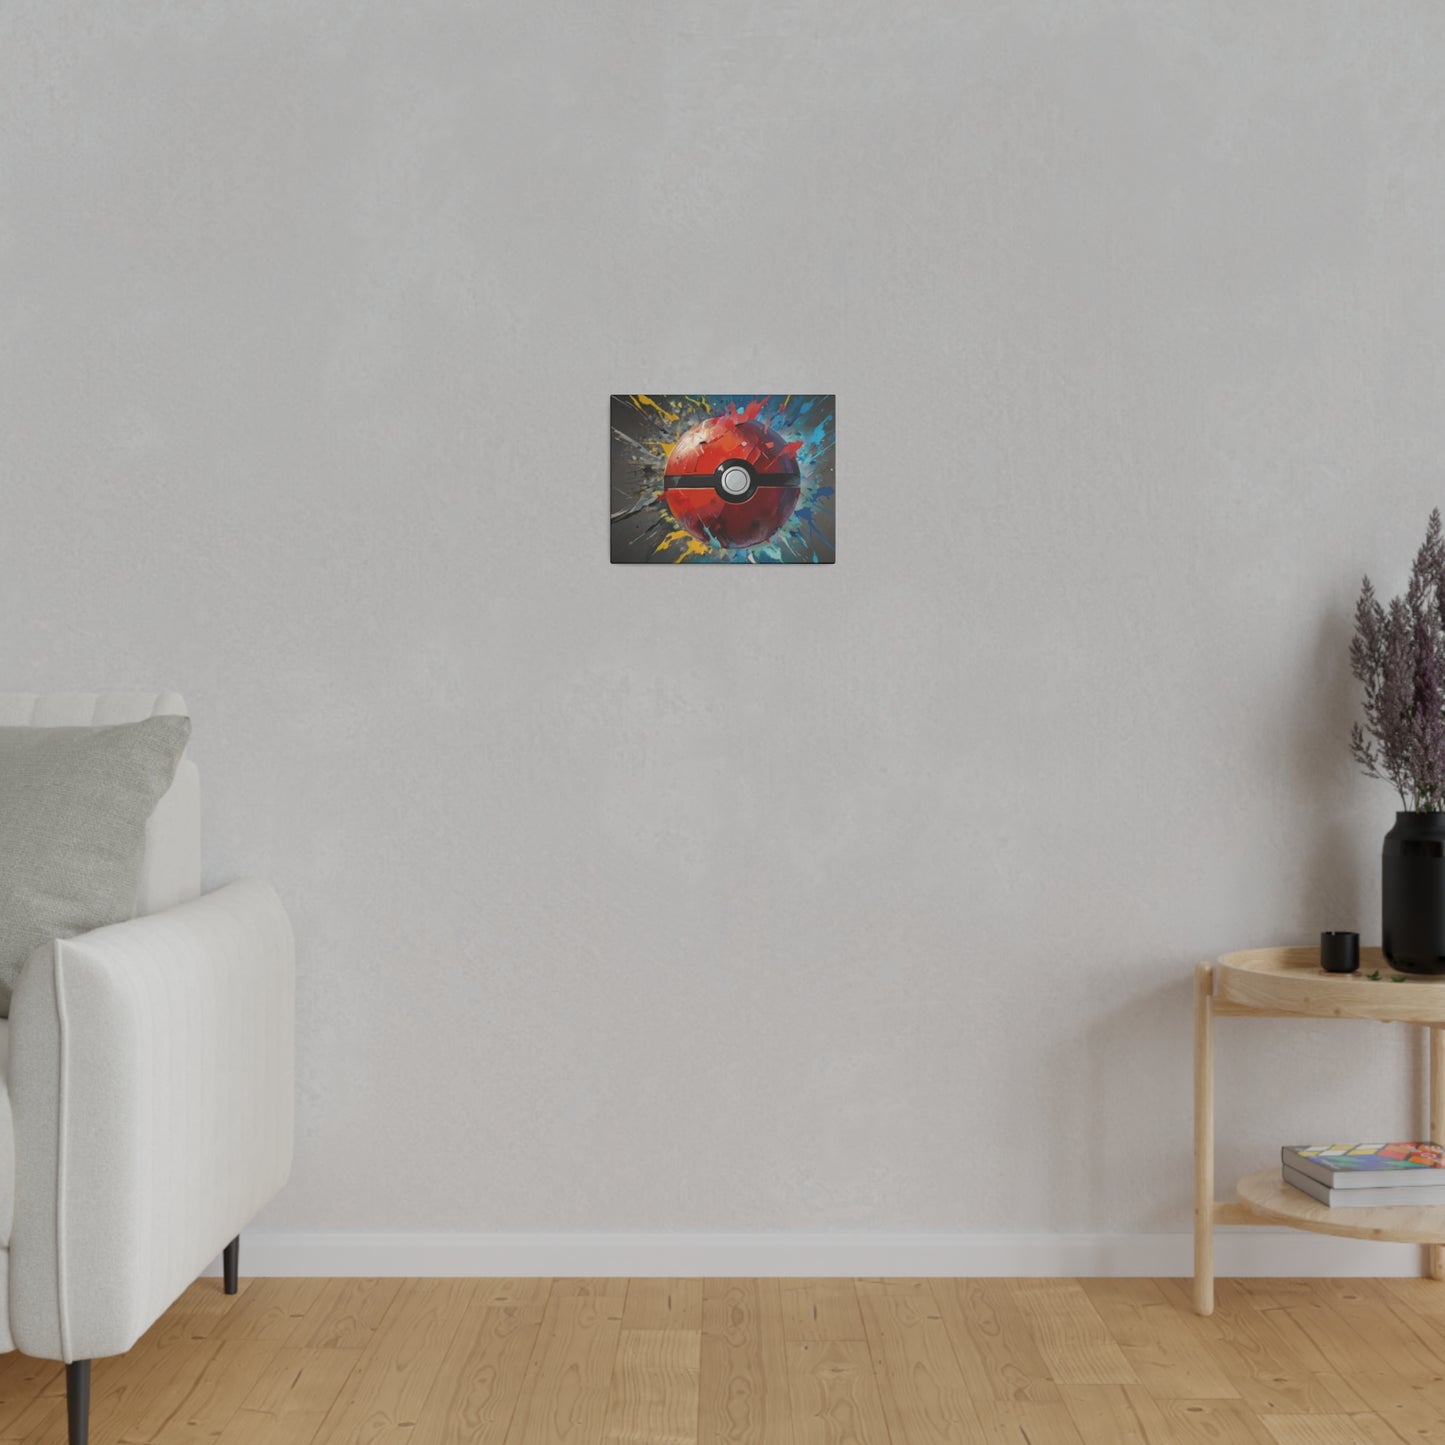 Shattering Colourful Poke-Ball - Matte Canvas, Stretched, 0.75"